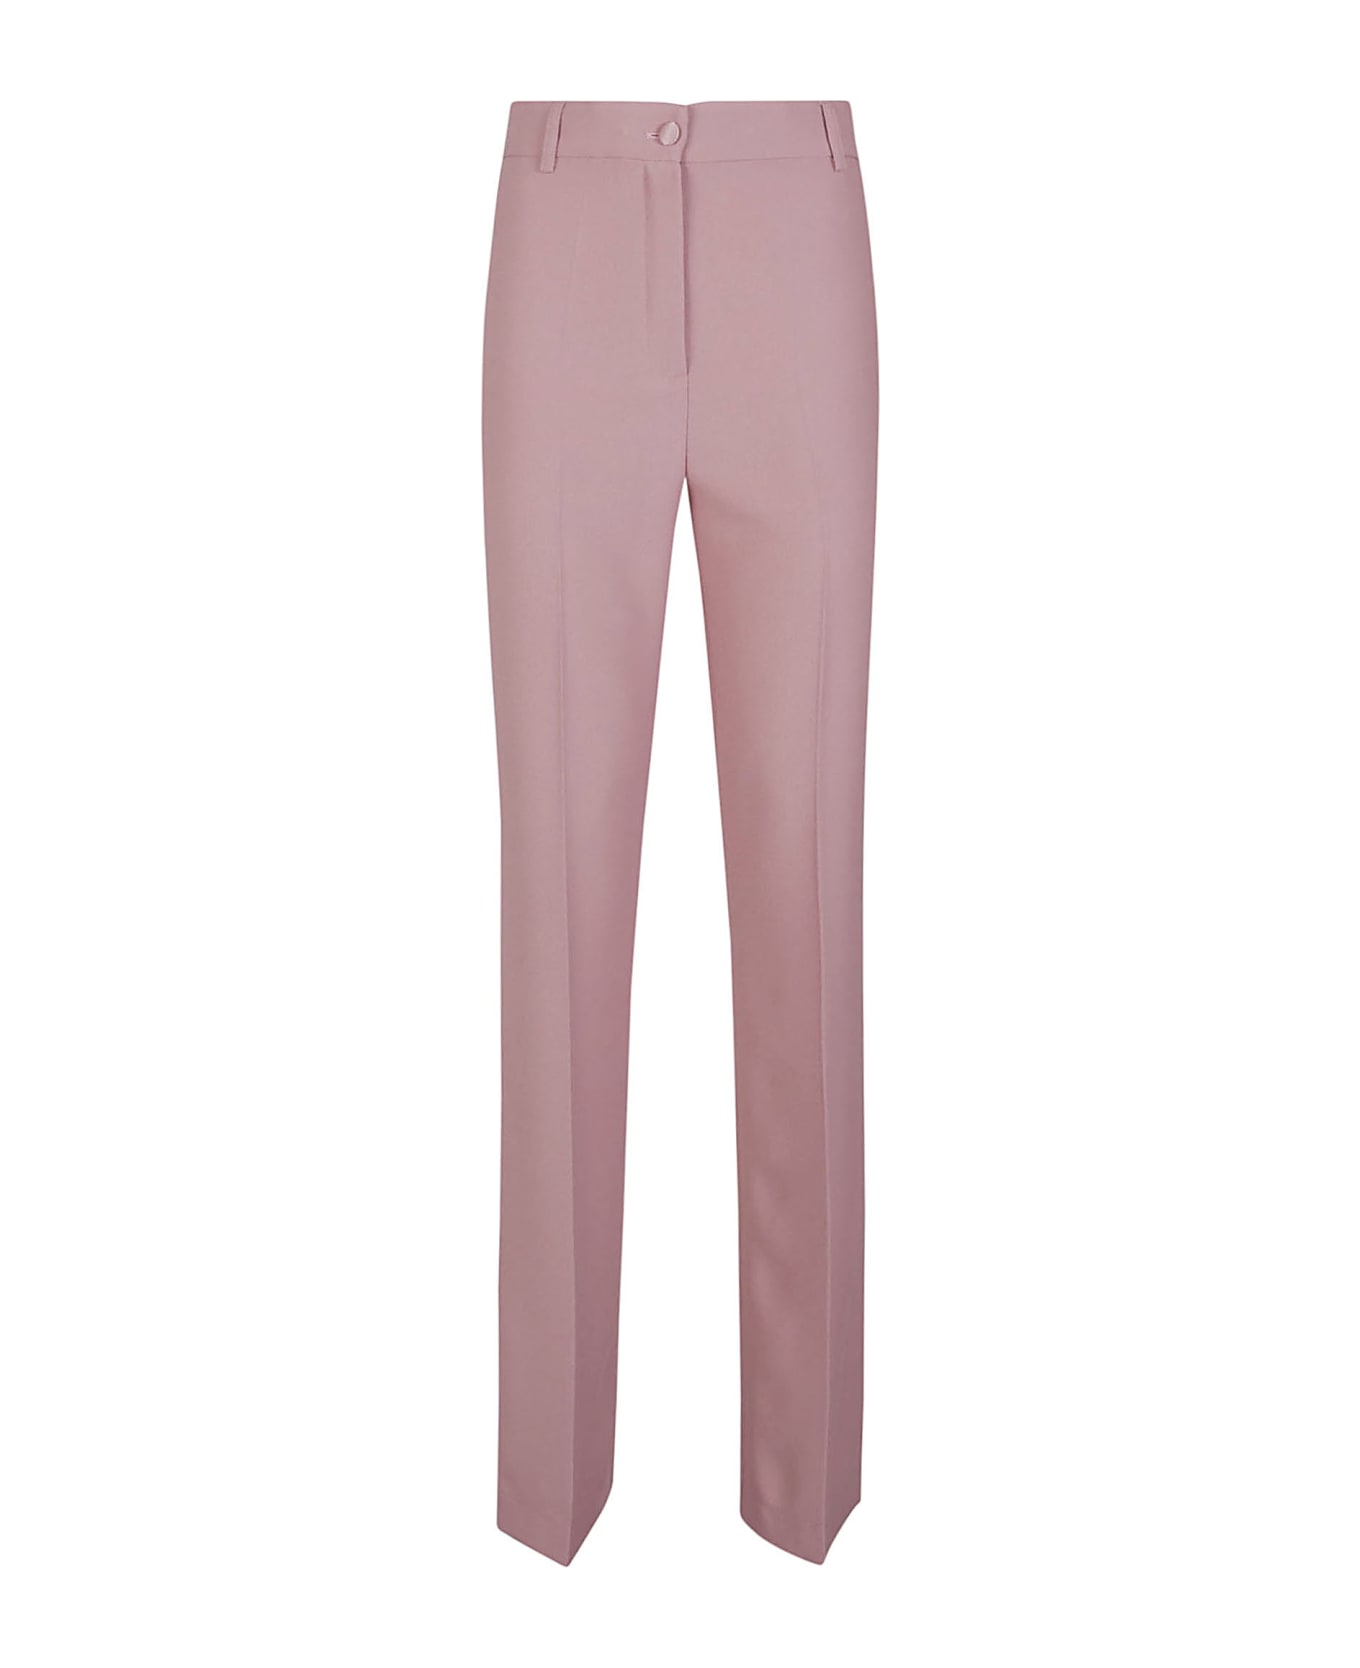 Hebe Studio Trousers Pink - Pink ボトムス